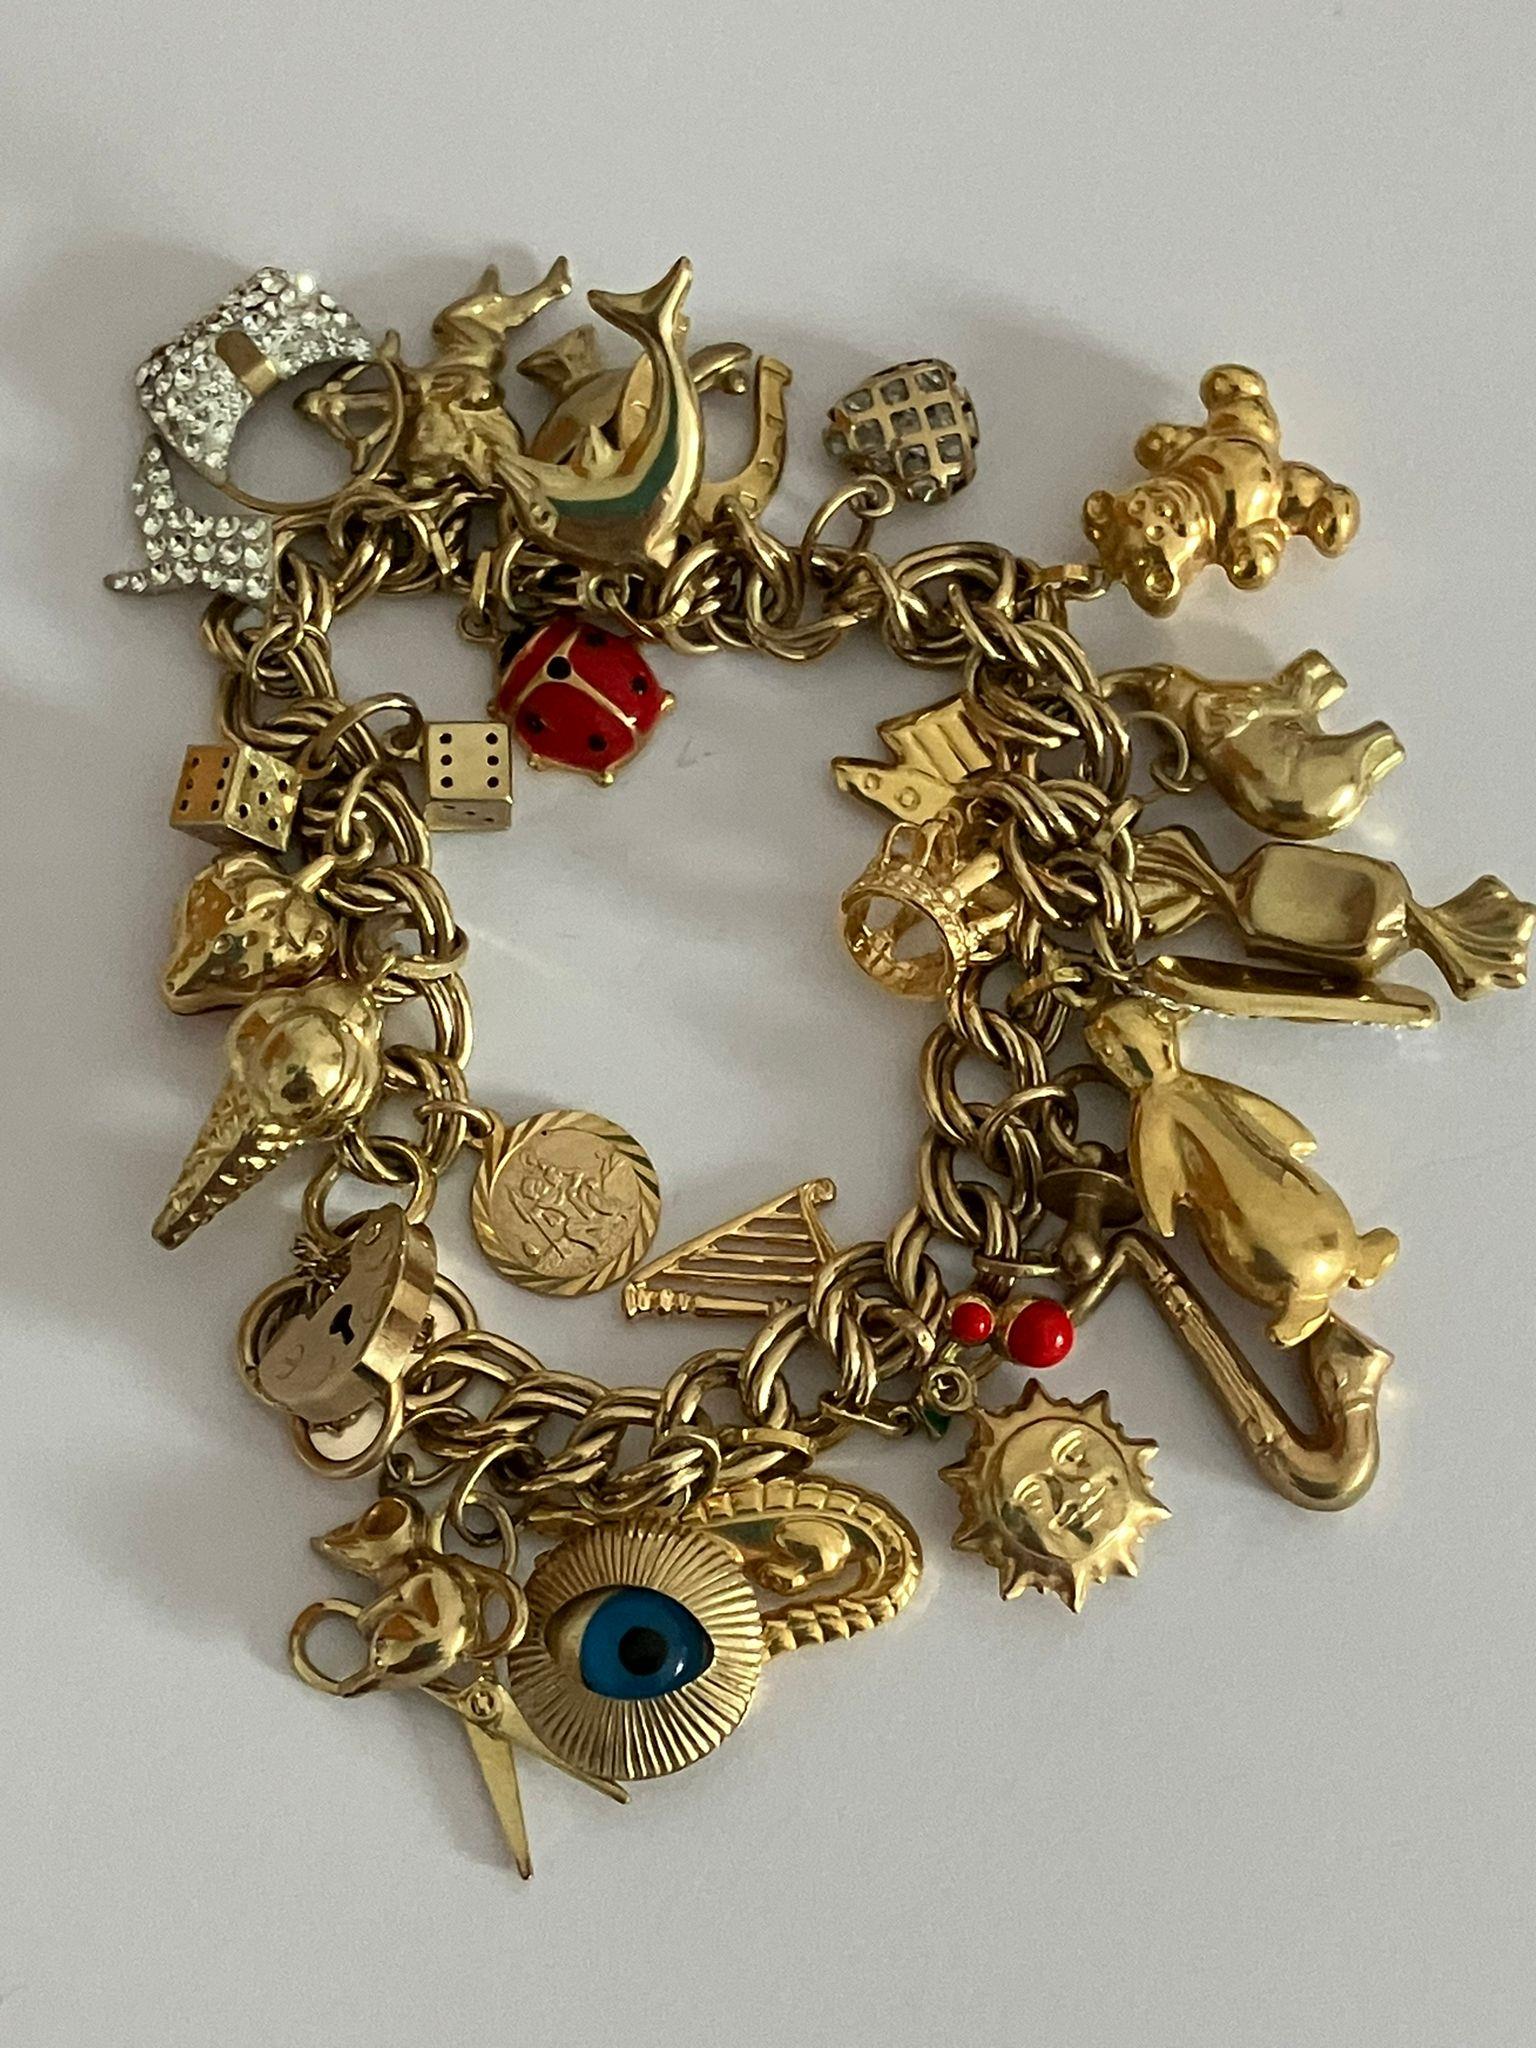 9 carat GOLD CHARM BRACELET Absolutely full of Gold charms, To include Dolphin, Ladybird, Magic - Image 6 of 6